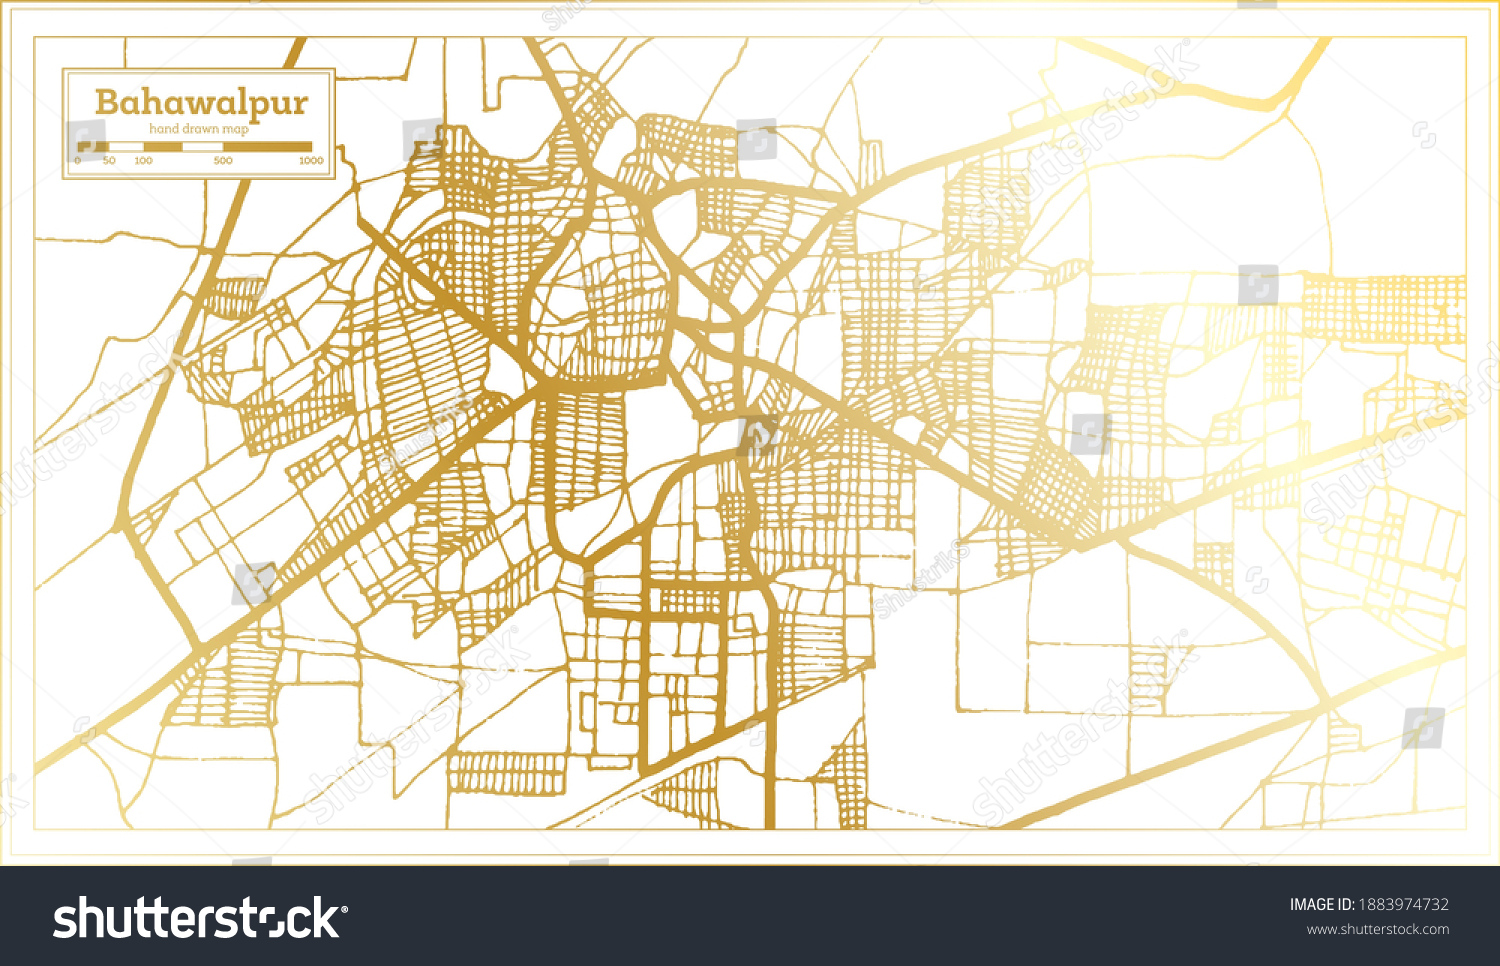 SVG of Bahawalpur Pakistan City Map in Retro Style in Golden Color. Outline Map. Vector Illustration. svg